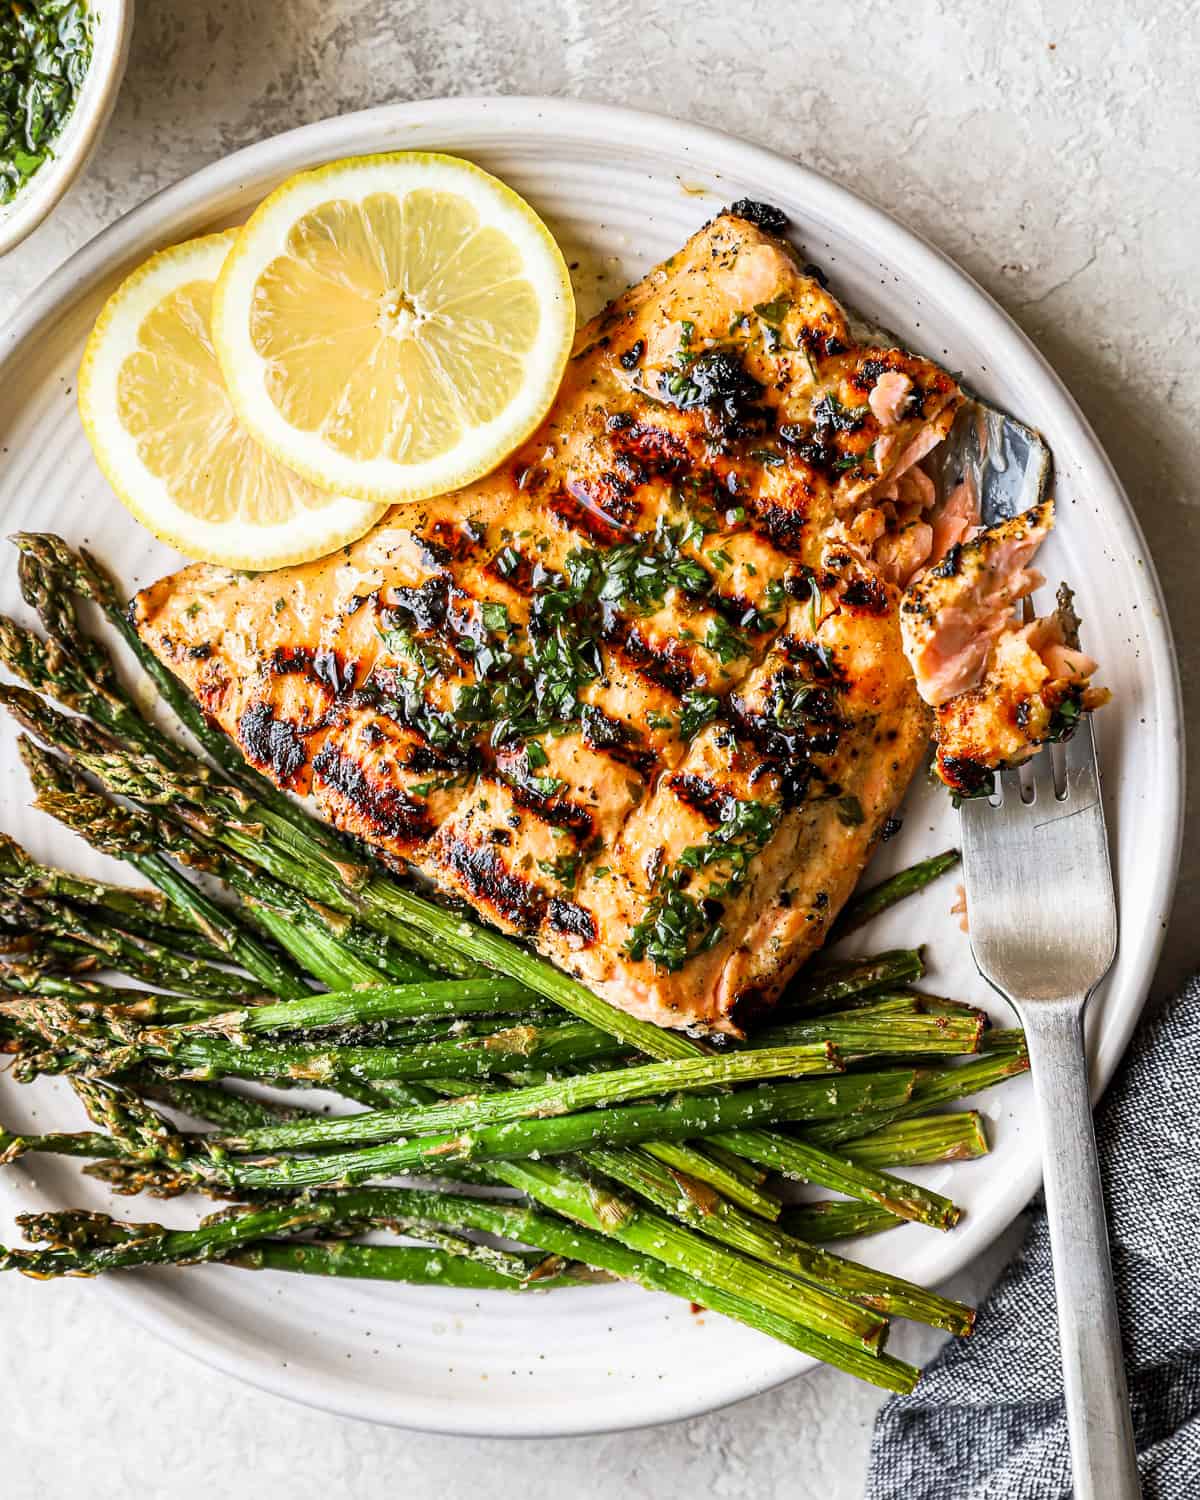 overhead view of a partially eaten grilled salmon fillet on a white plate with asparagus, lemon slices, and a fork.